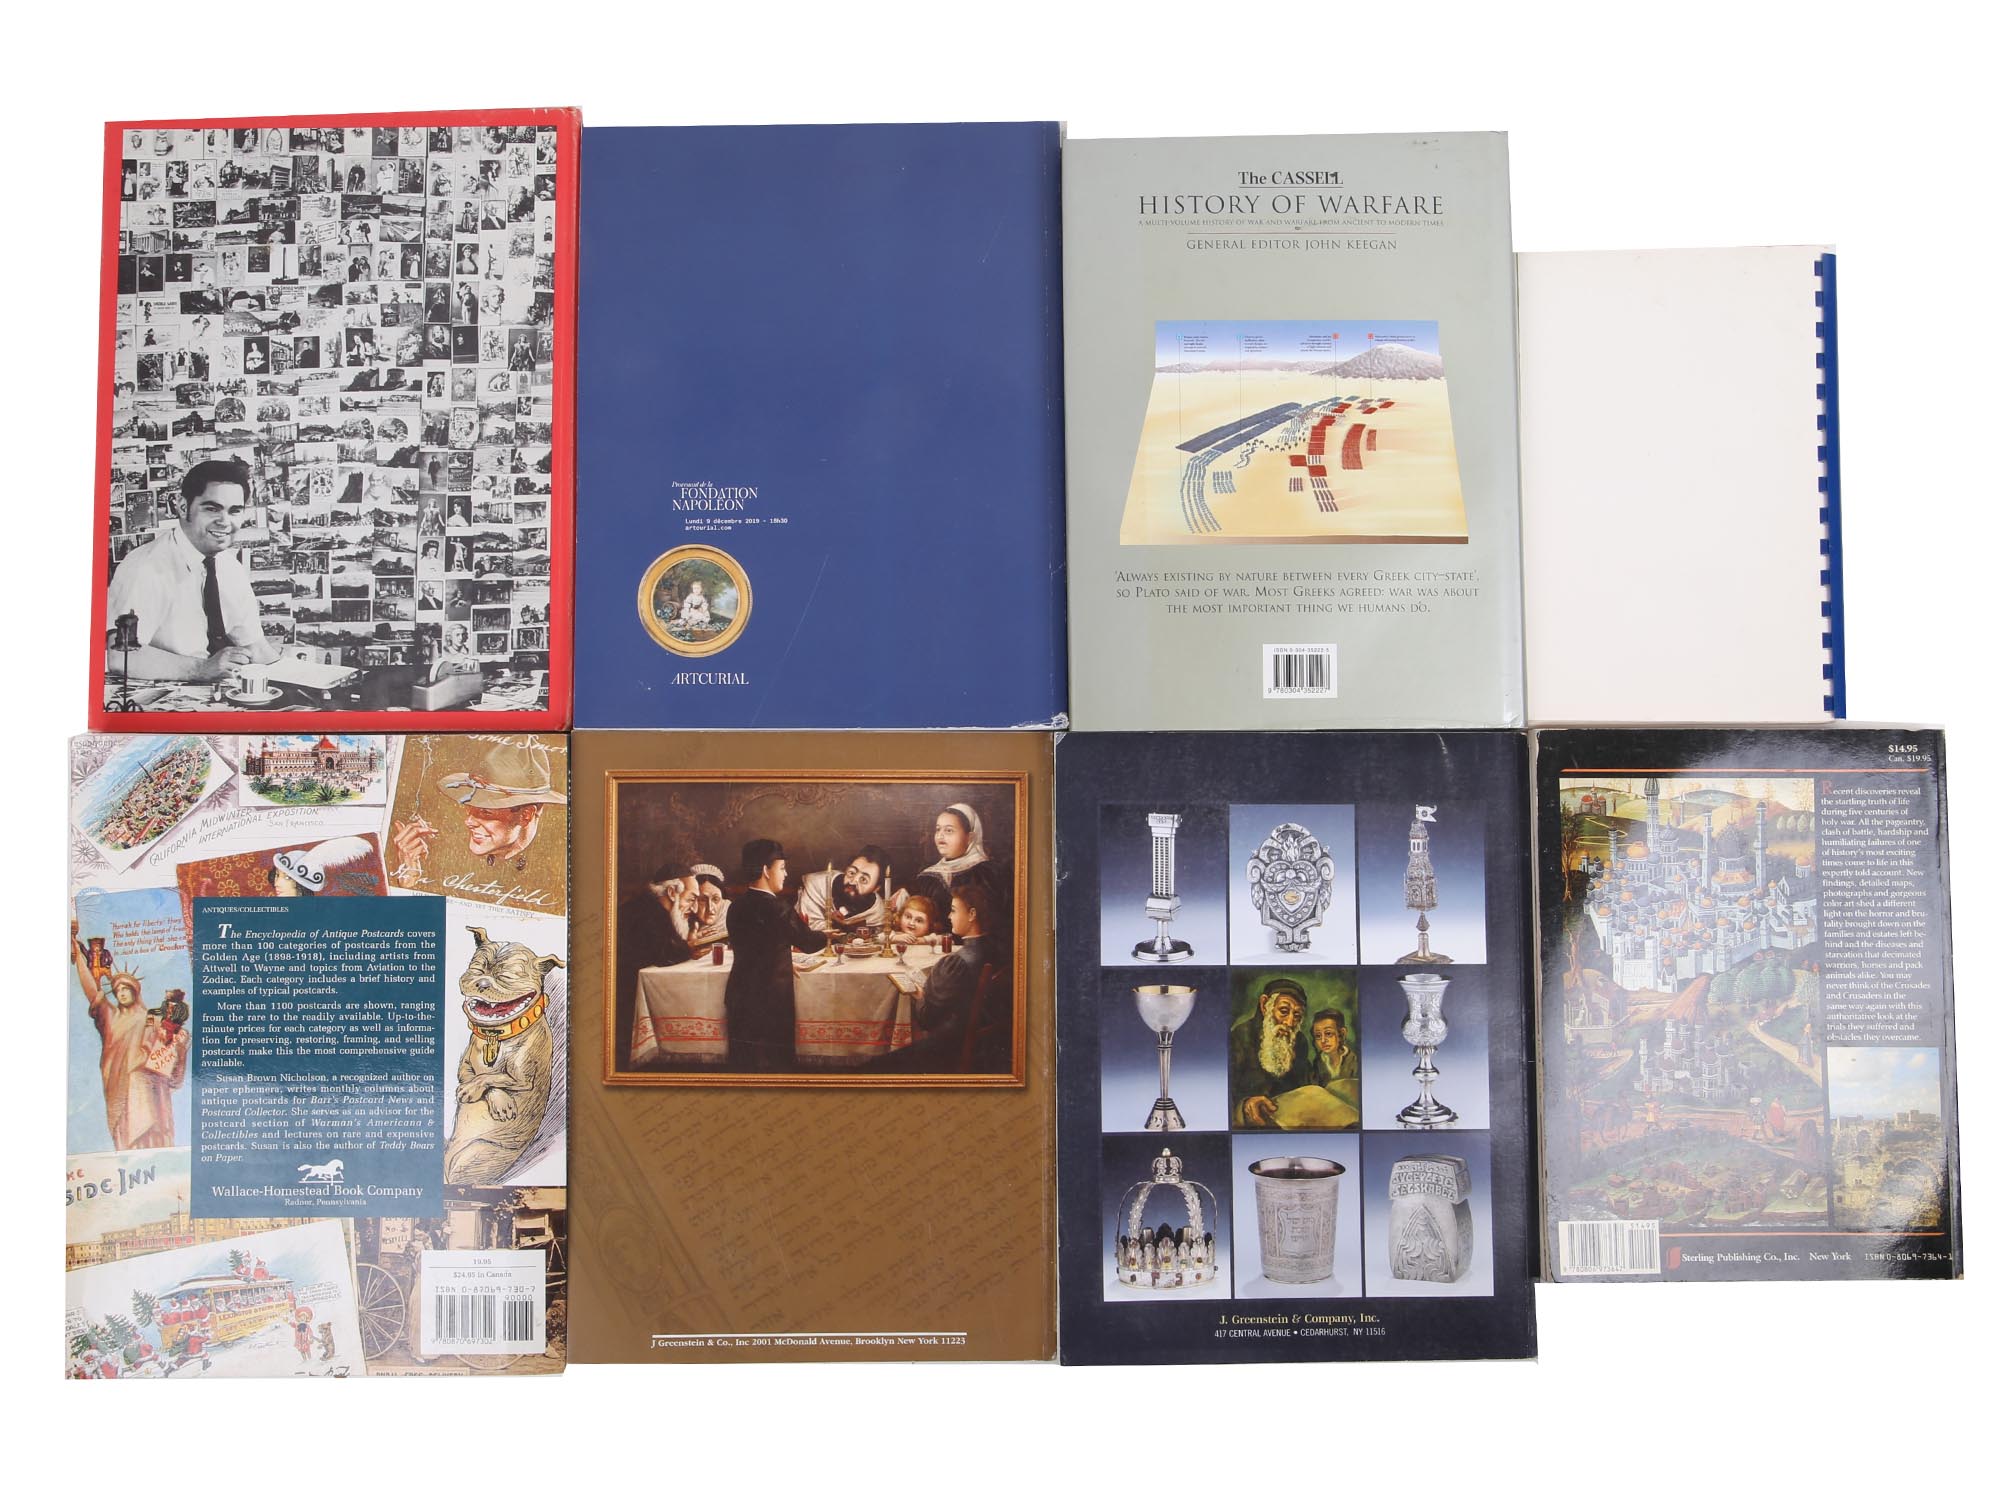 JUDAICA AUCTION CATALOGS AND COLLECTIBLES BOOKS PIC-1